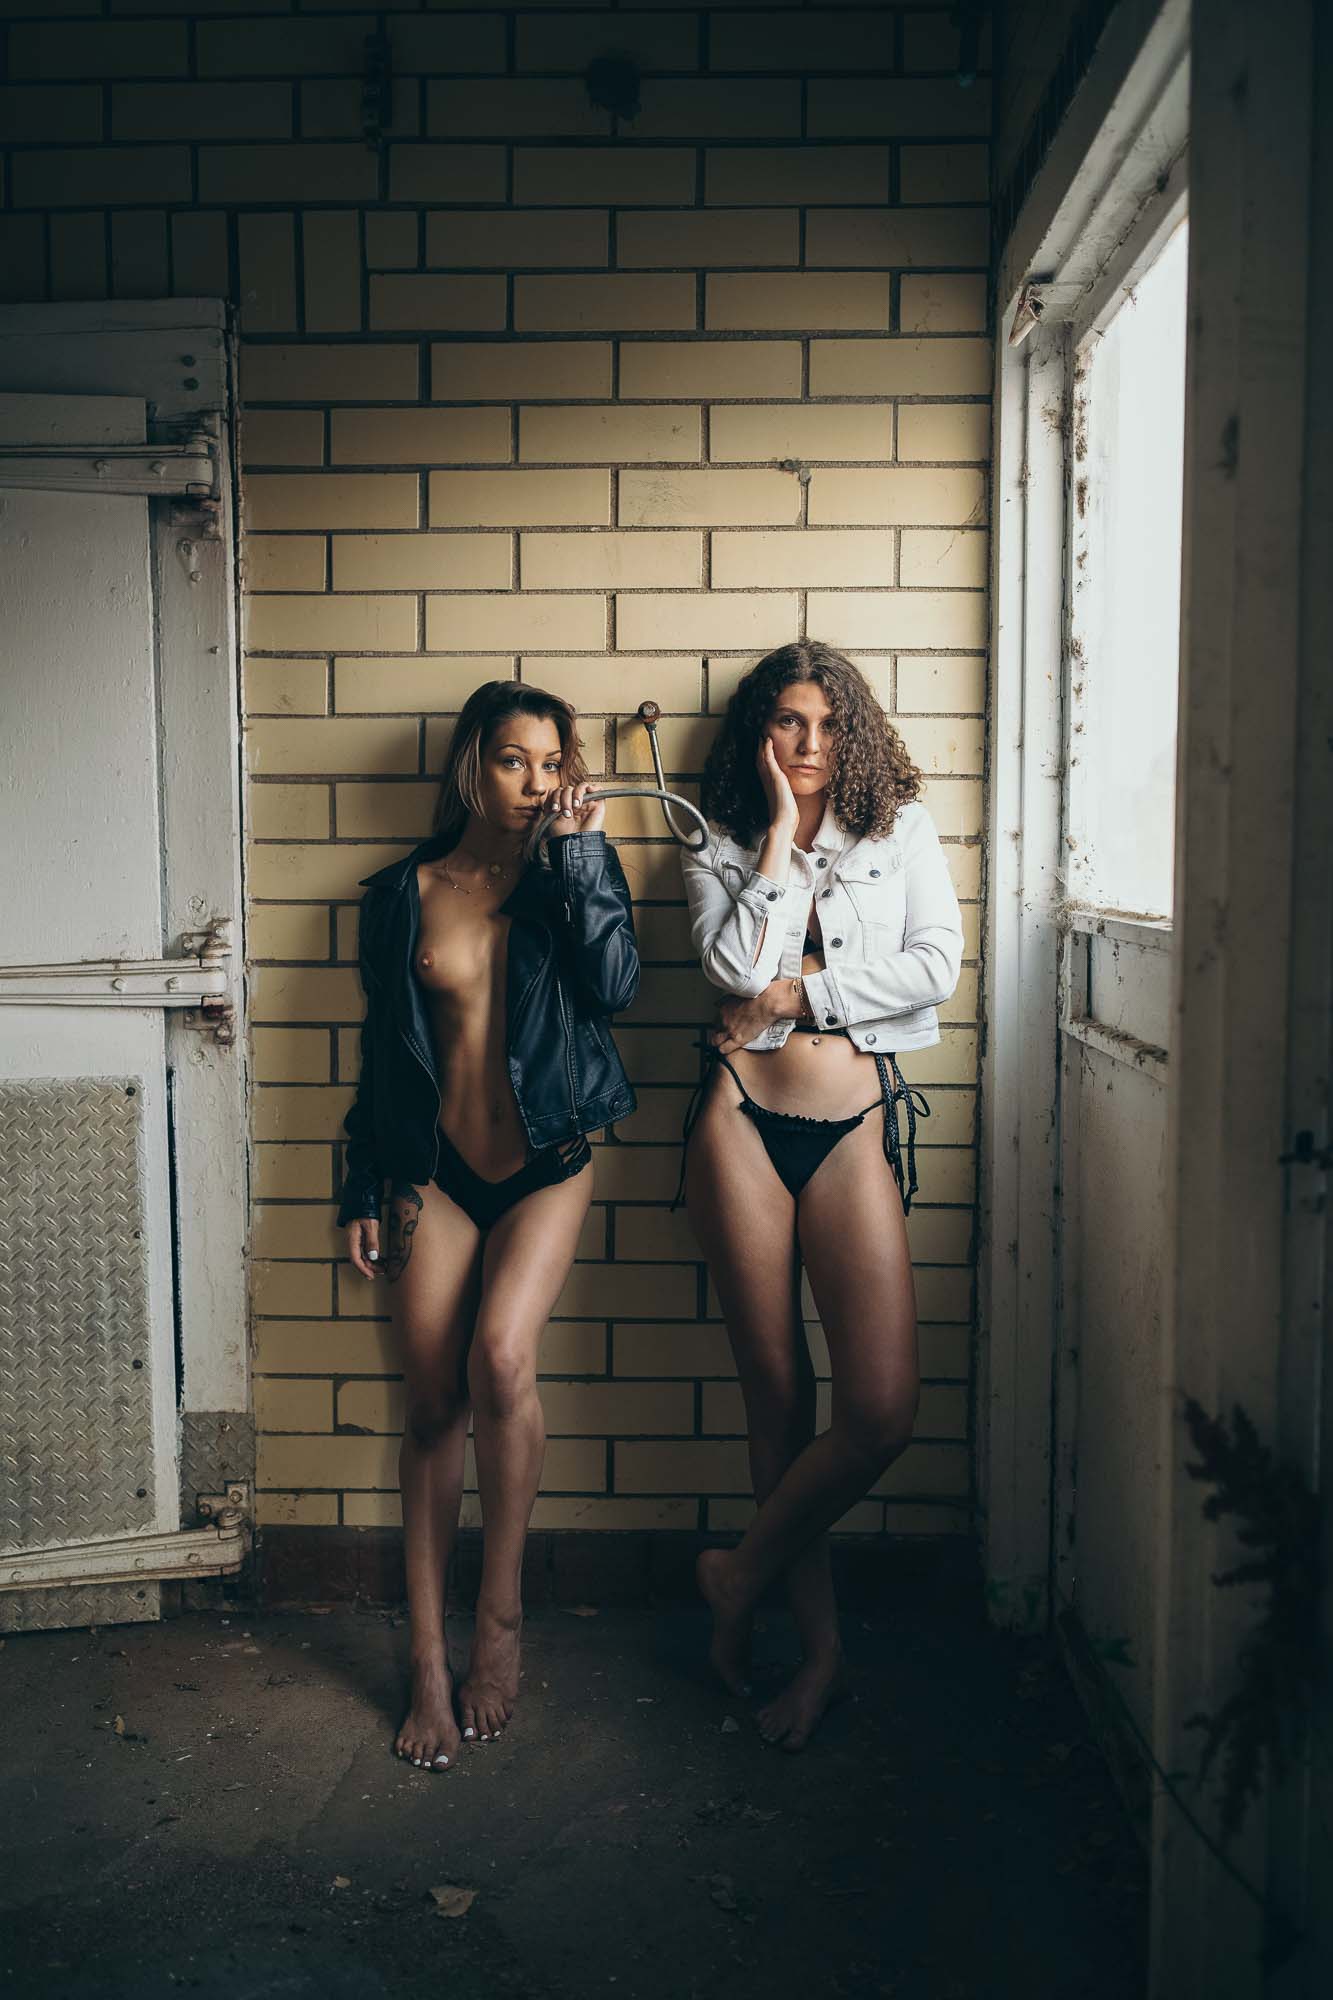 Models in Lingerie in abandoned building | Nude | Boudoir Photography | Fashion Photography |